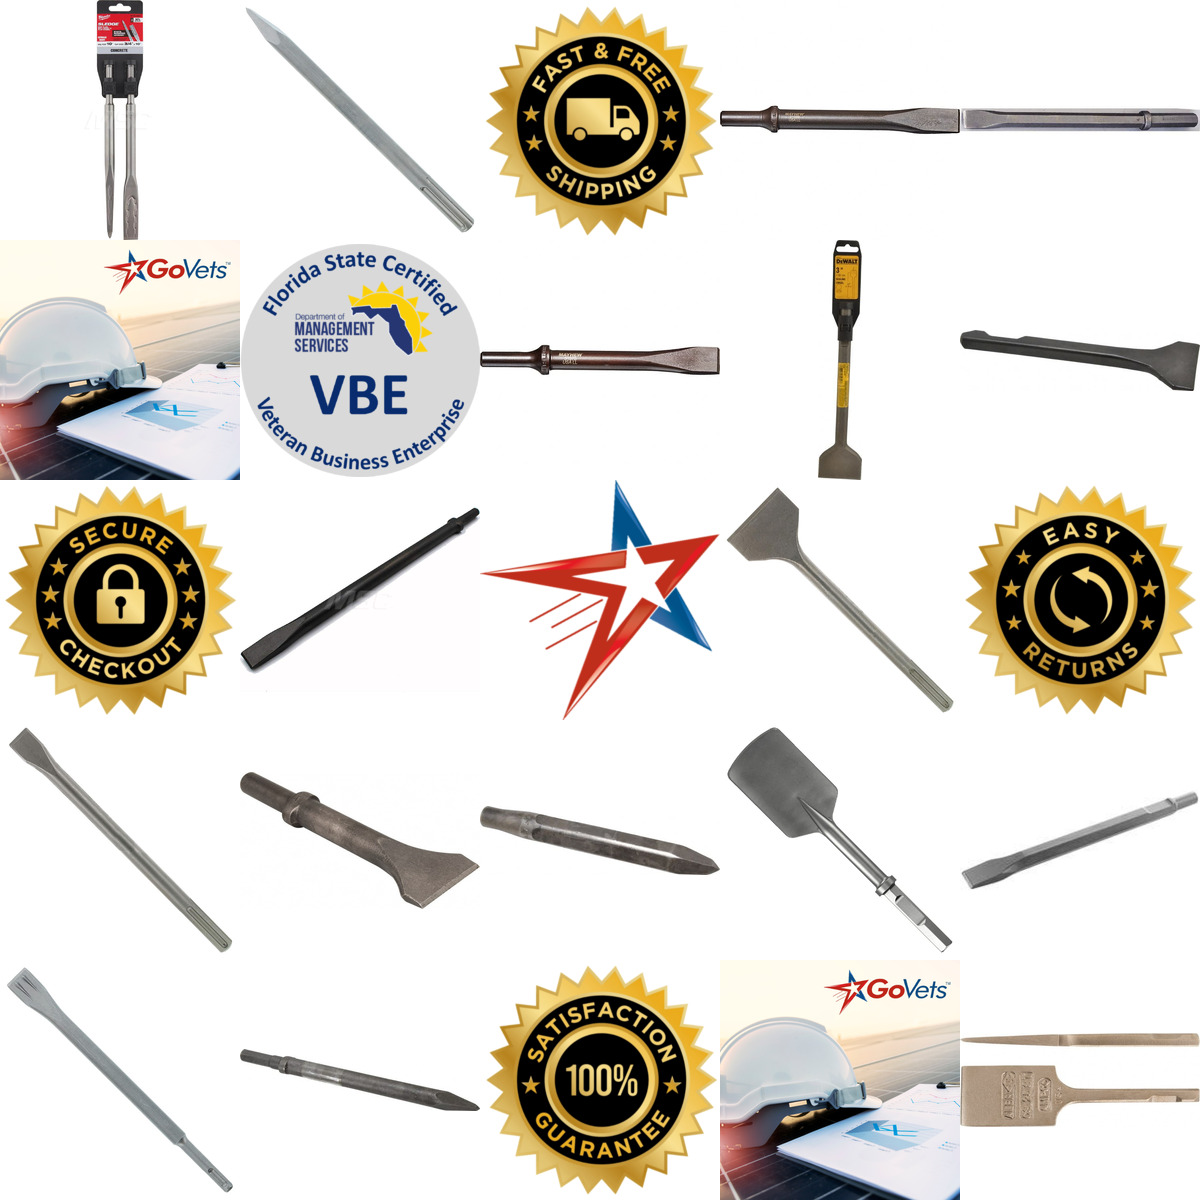 A selection of Hammer and Chipper Replacement Chisels products on GoVets